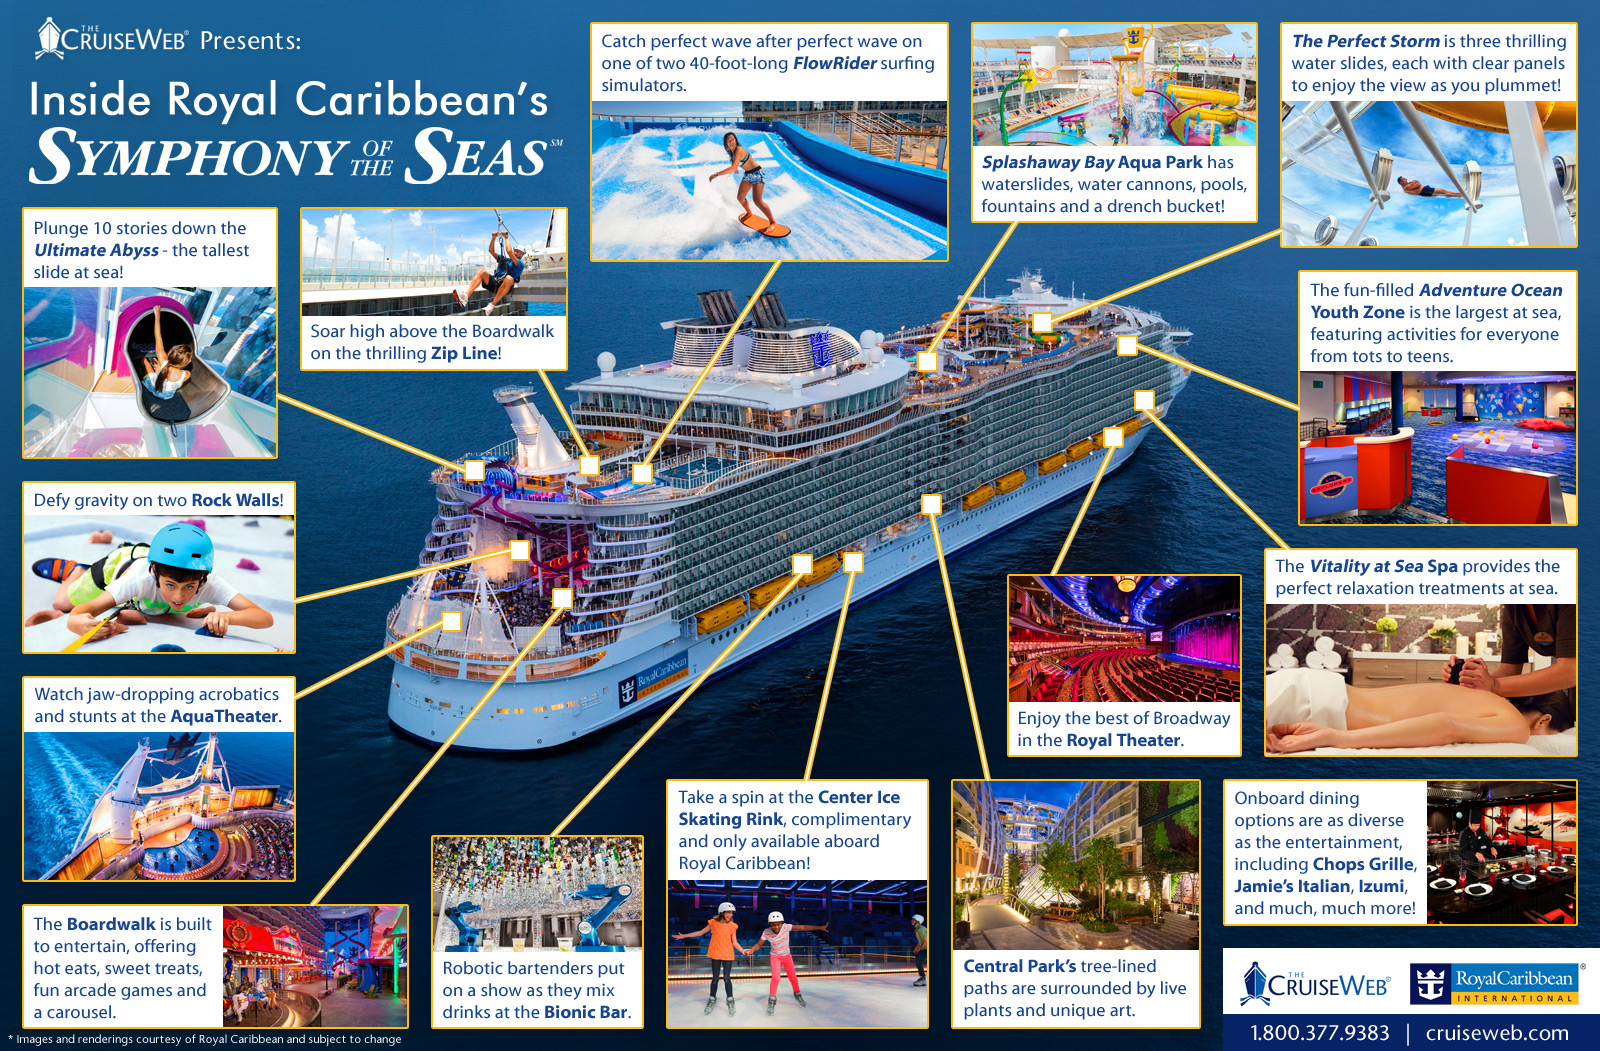 Royal Caribbean's Symphony of the Seas Cruise Ship, 2018 and 2019